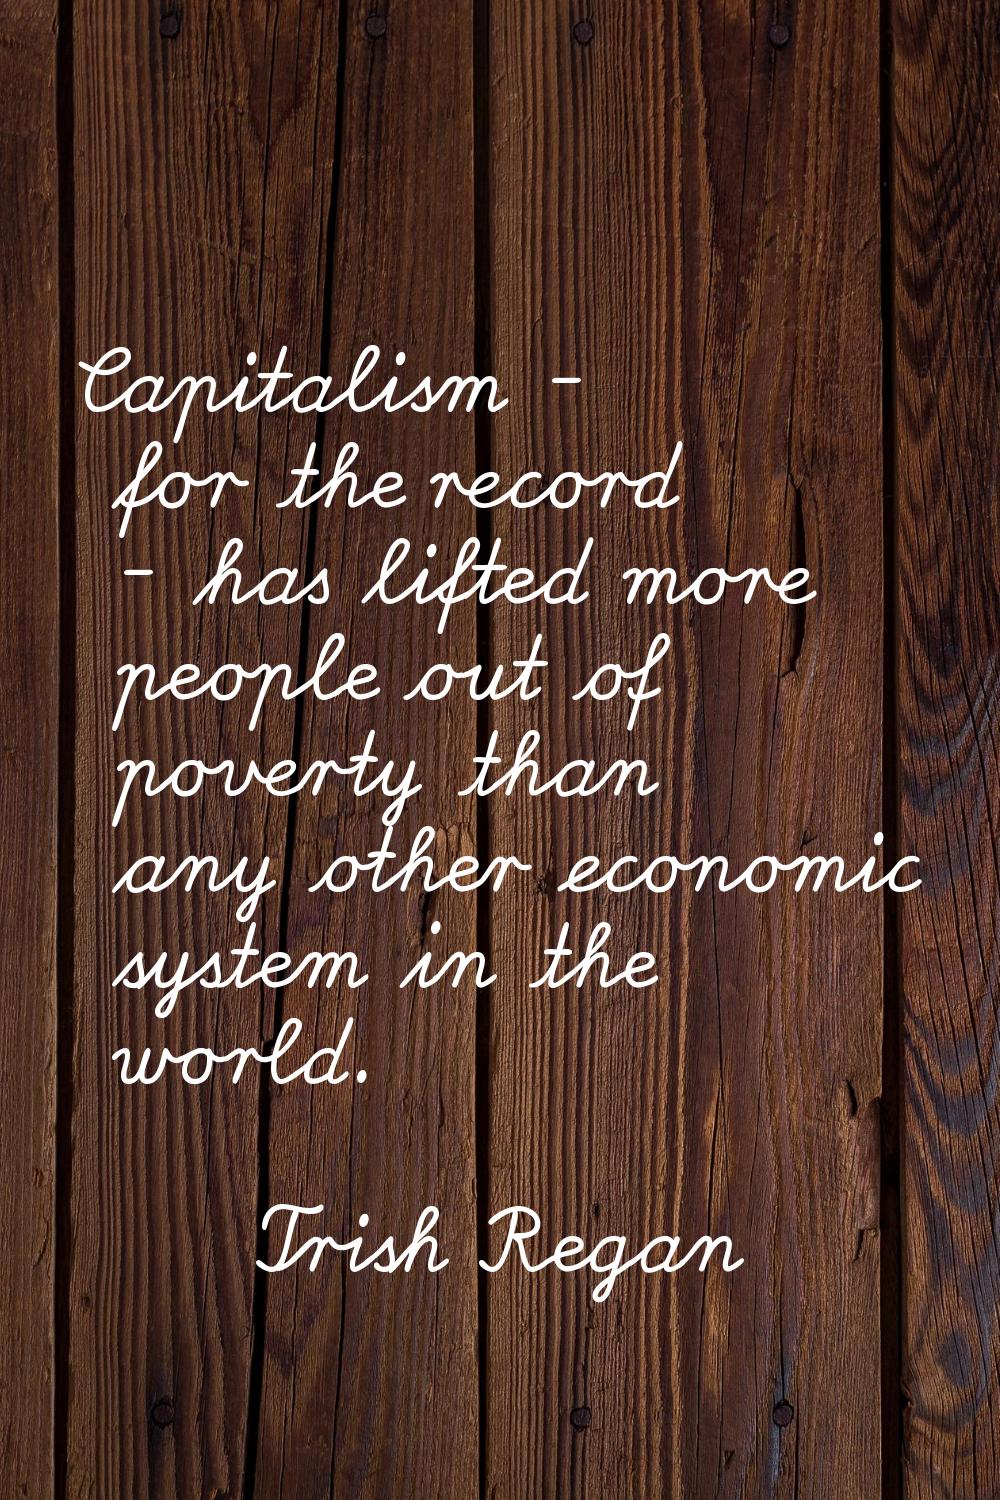 Capitalism - for the record - has lifted more people out of poverty than any other economic system 